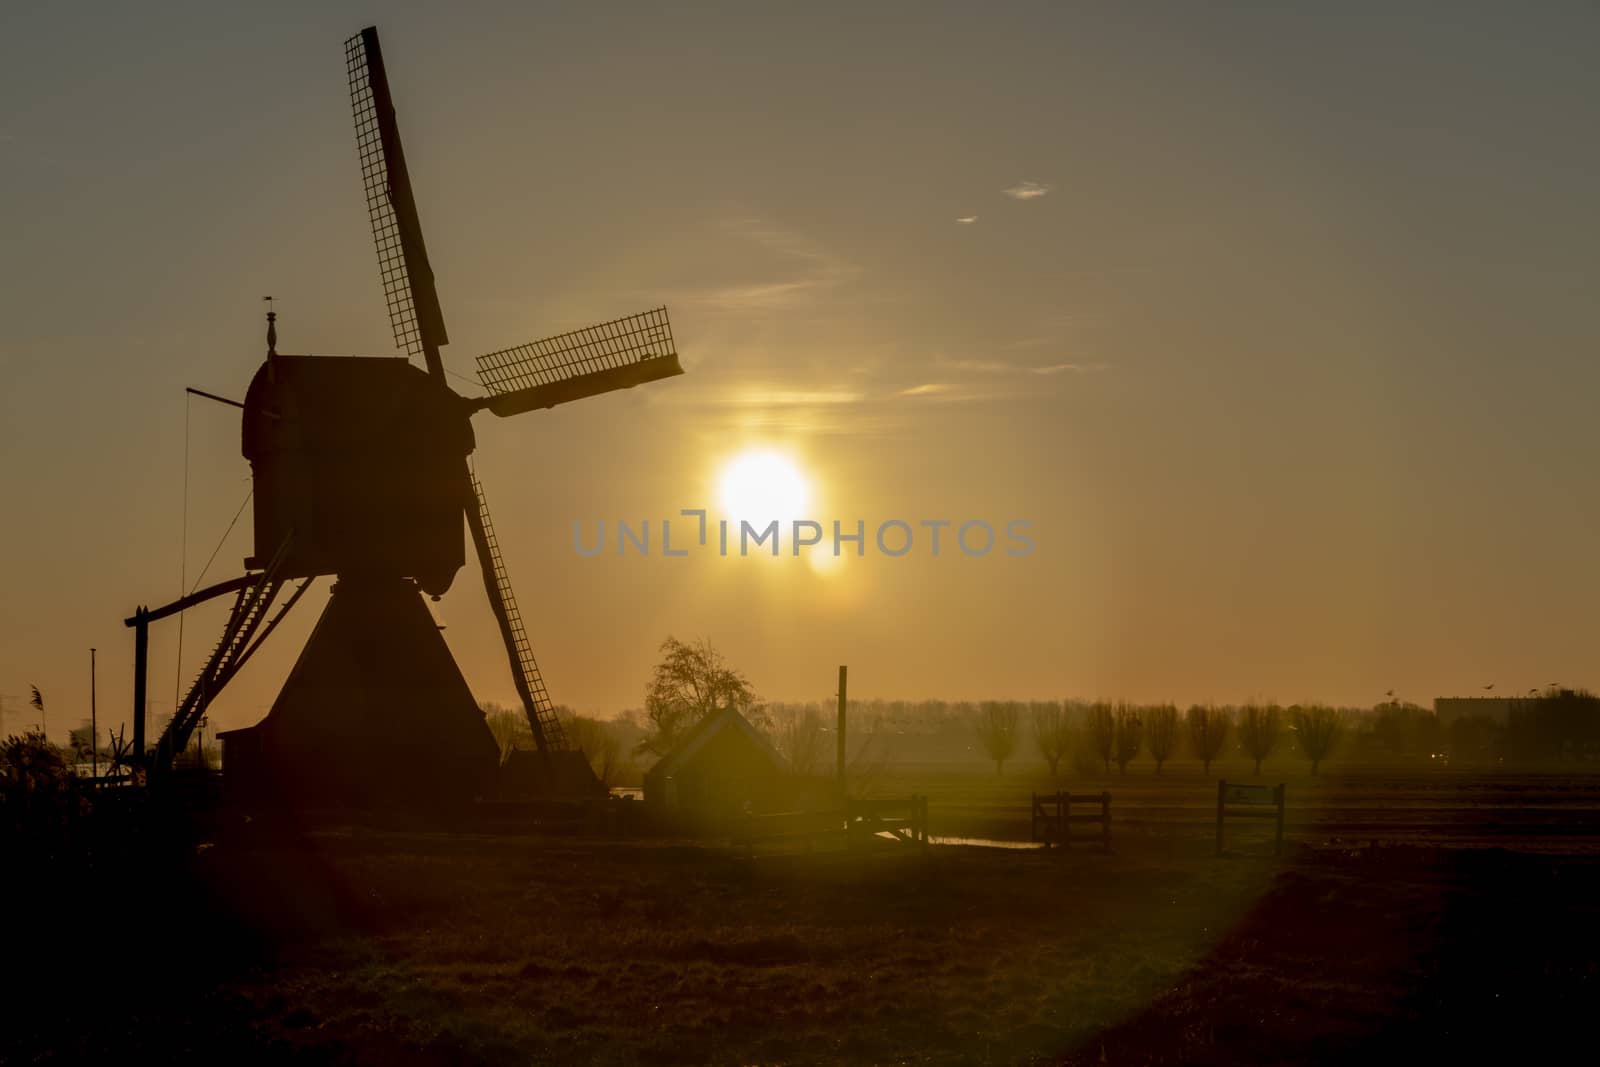 Dutch rural landscape at the early morning sunrise creating silhouettes with the back lit